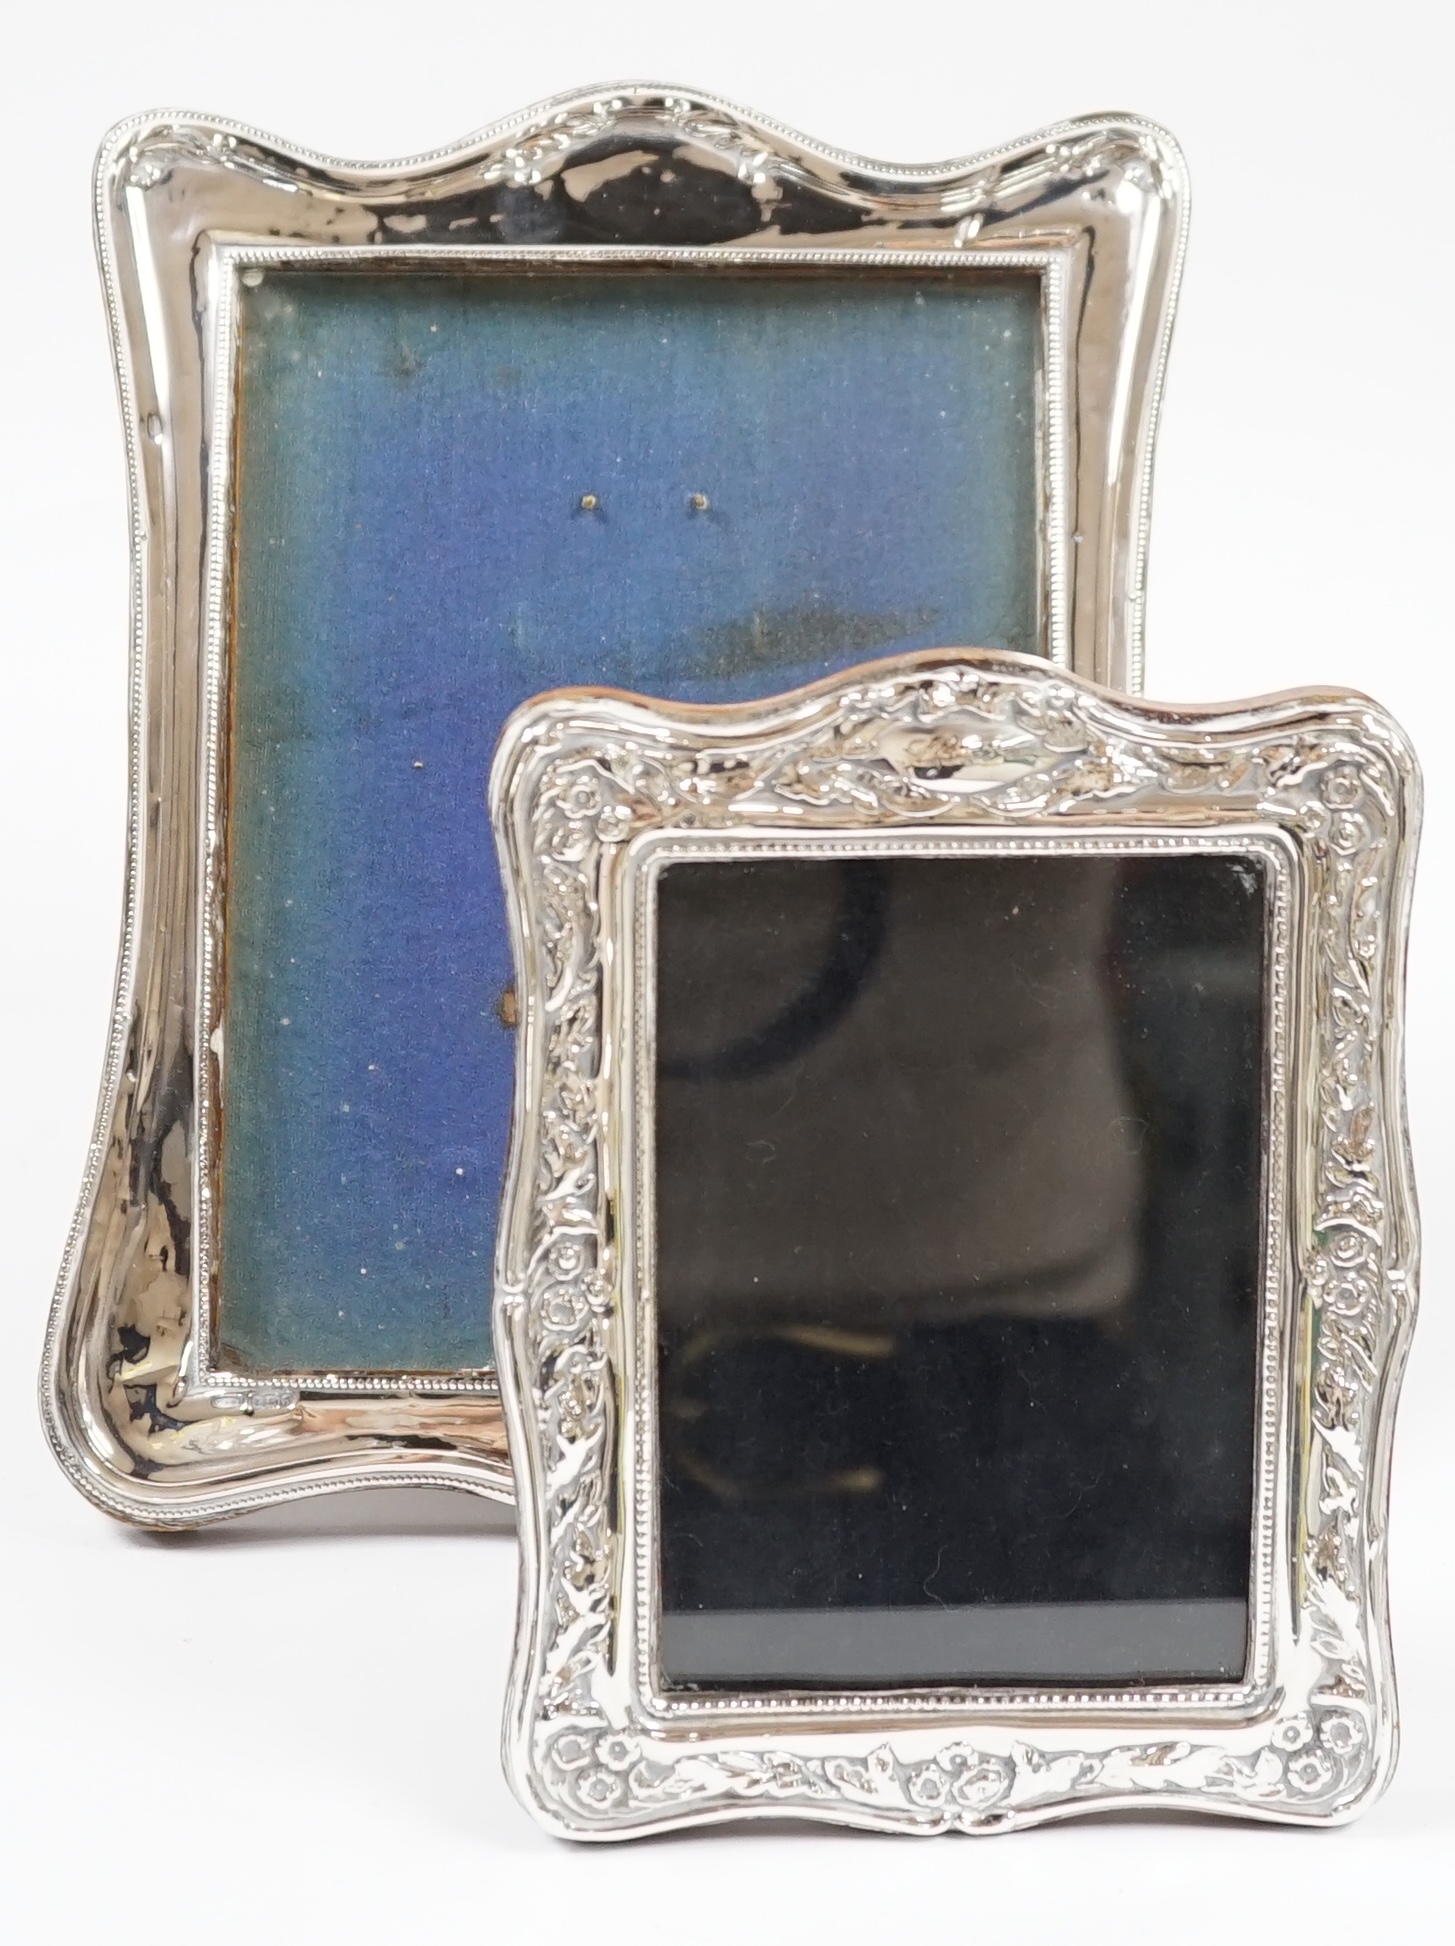 A George V silver mounted photograph frame, Birmingham, 1917, 25cm, together with a modern silver mounted photograph frame. Condition - poor to fair